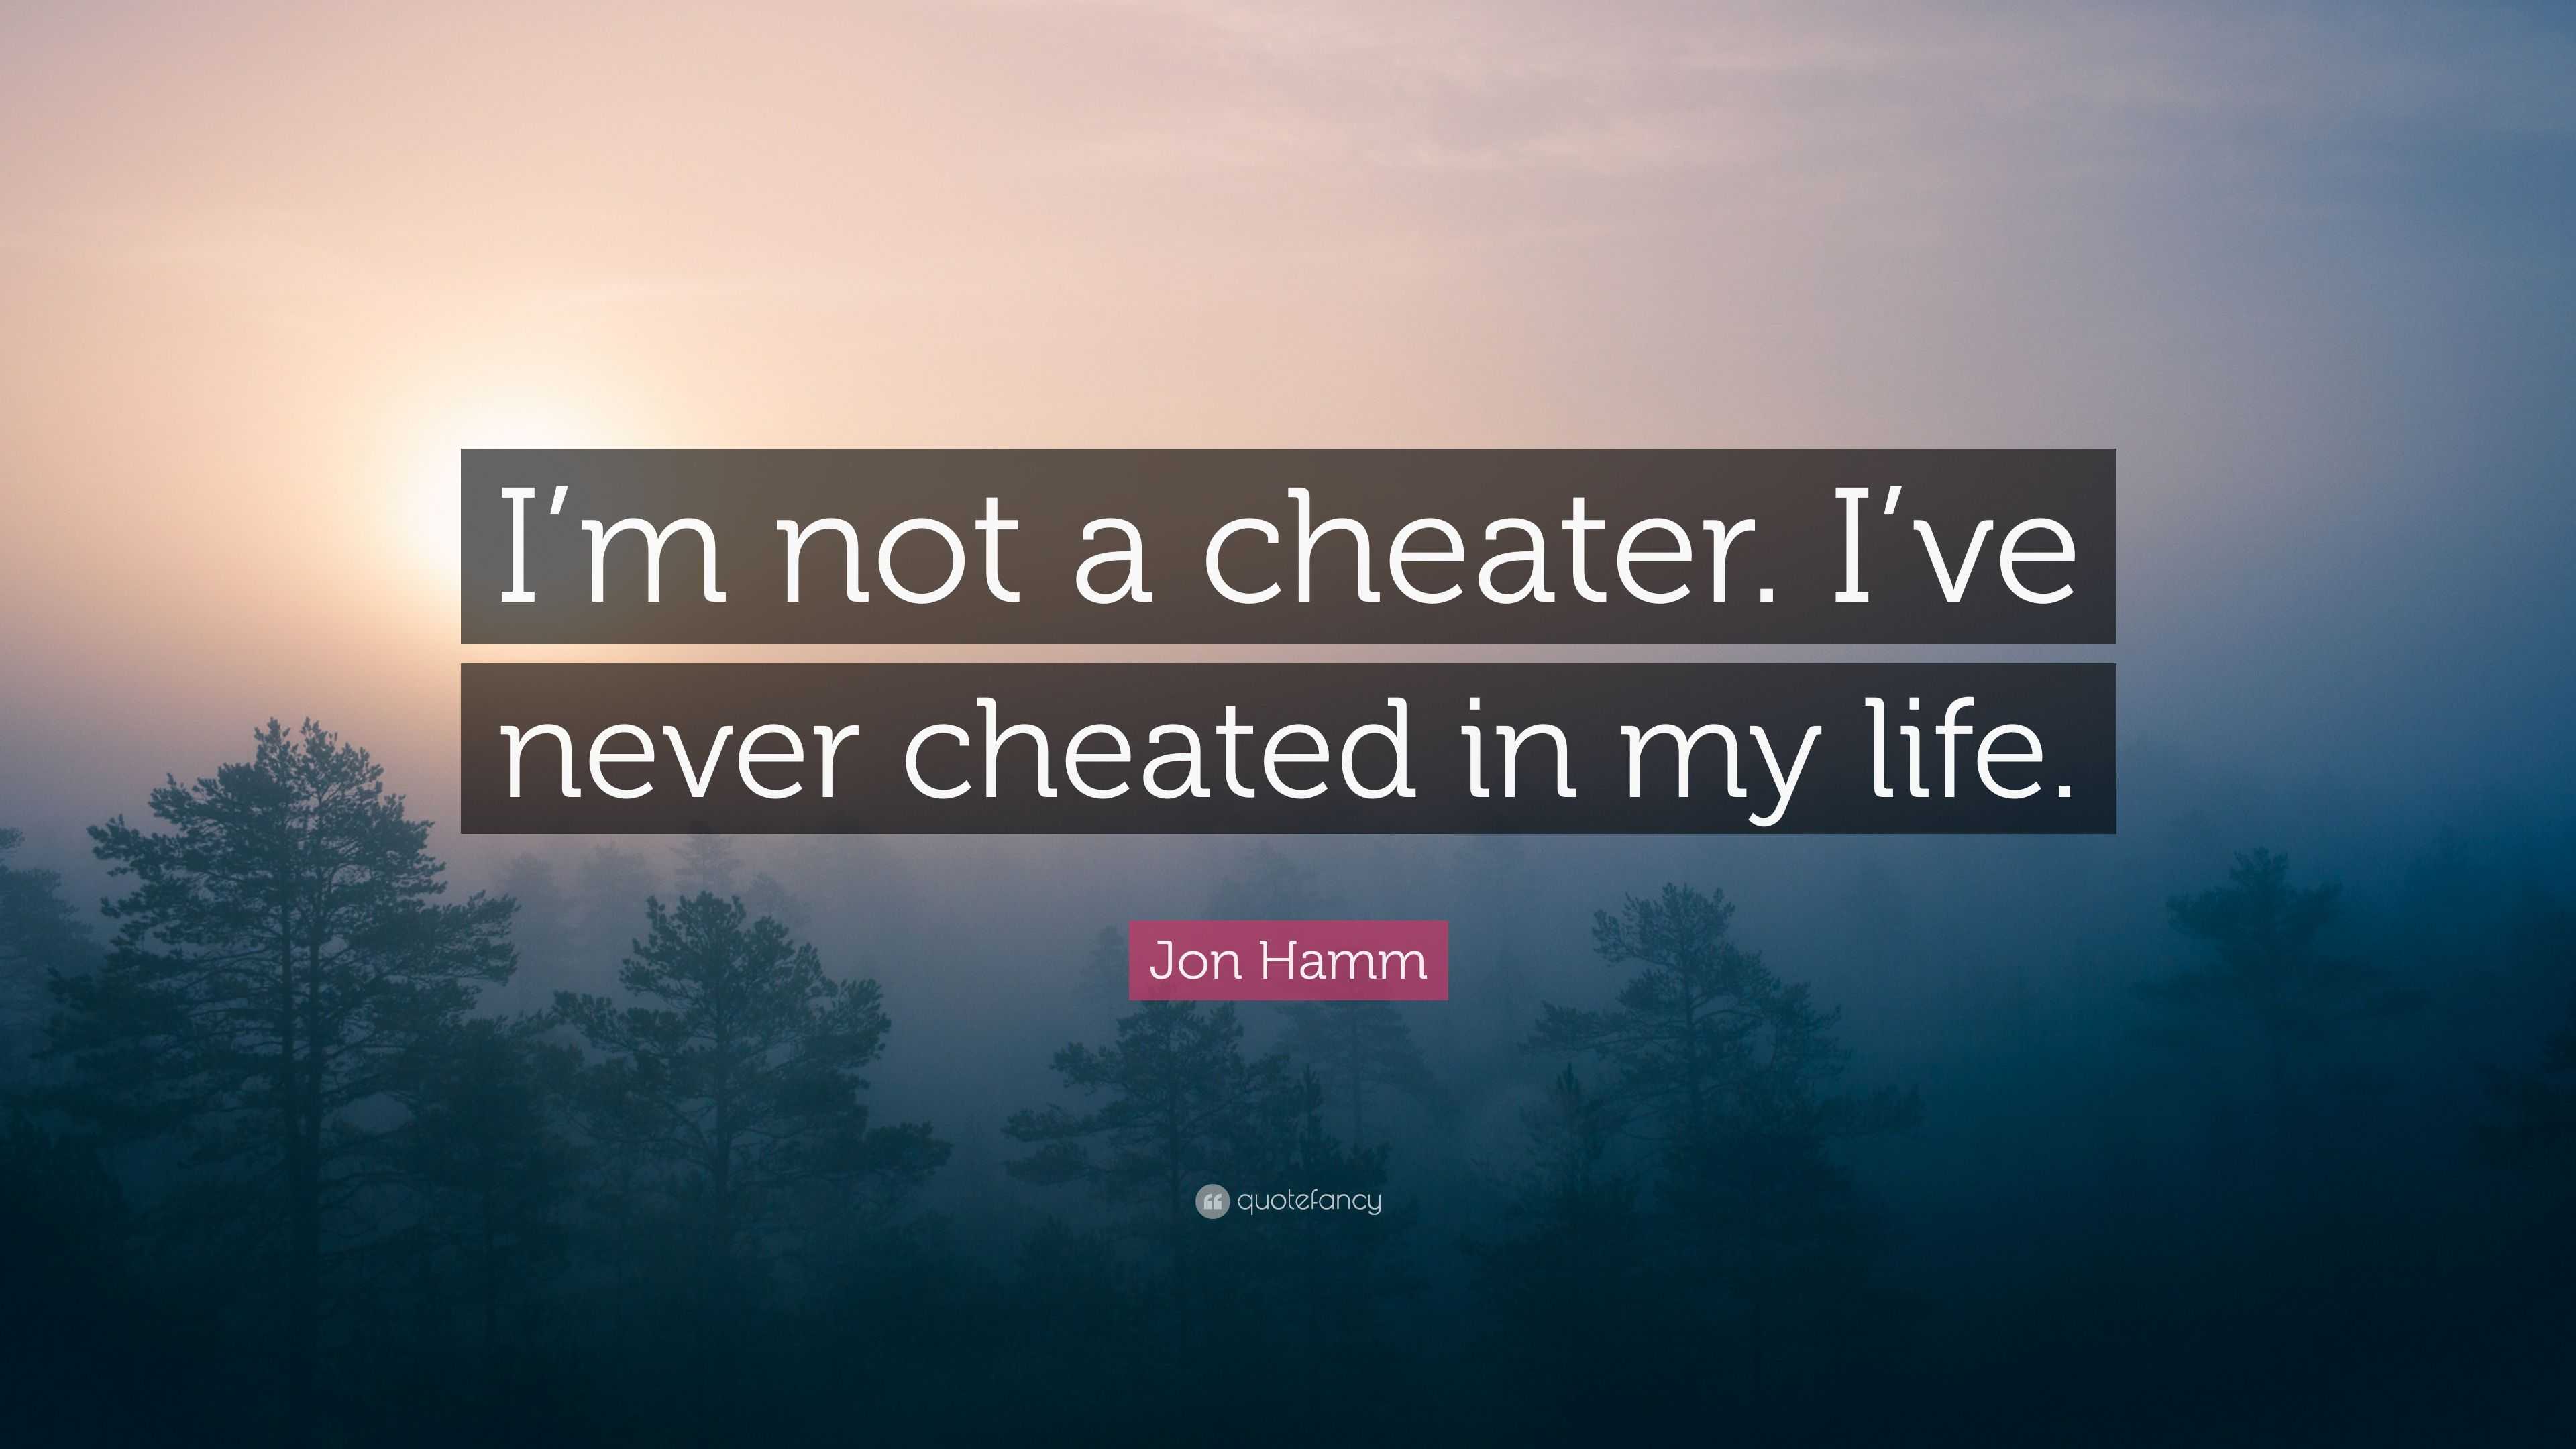 Jon Hamm Quote: “I'm Not A Cheater. I've Never Cheated In My Life.”